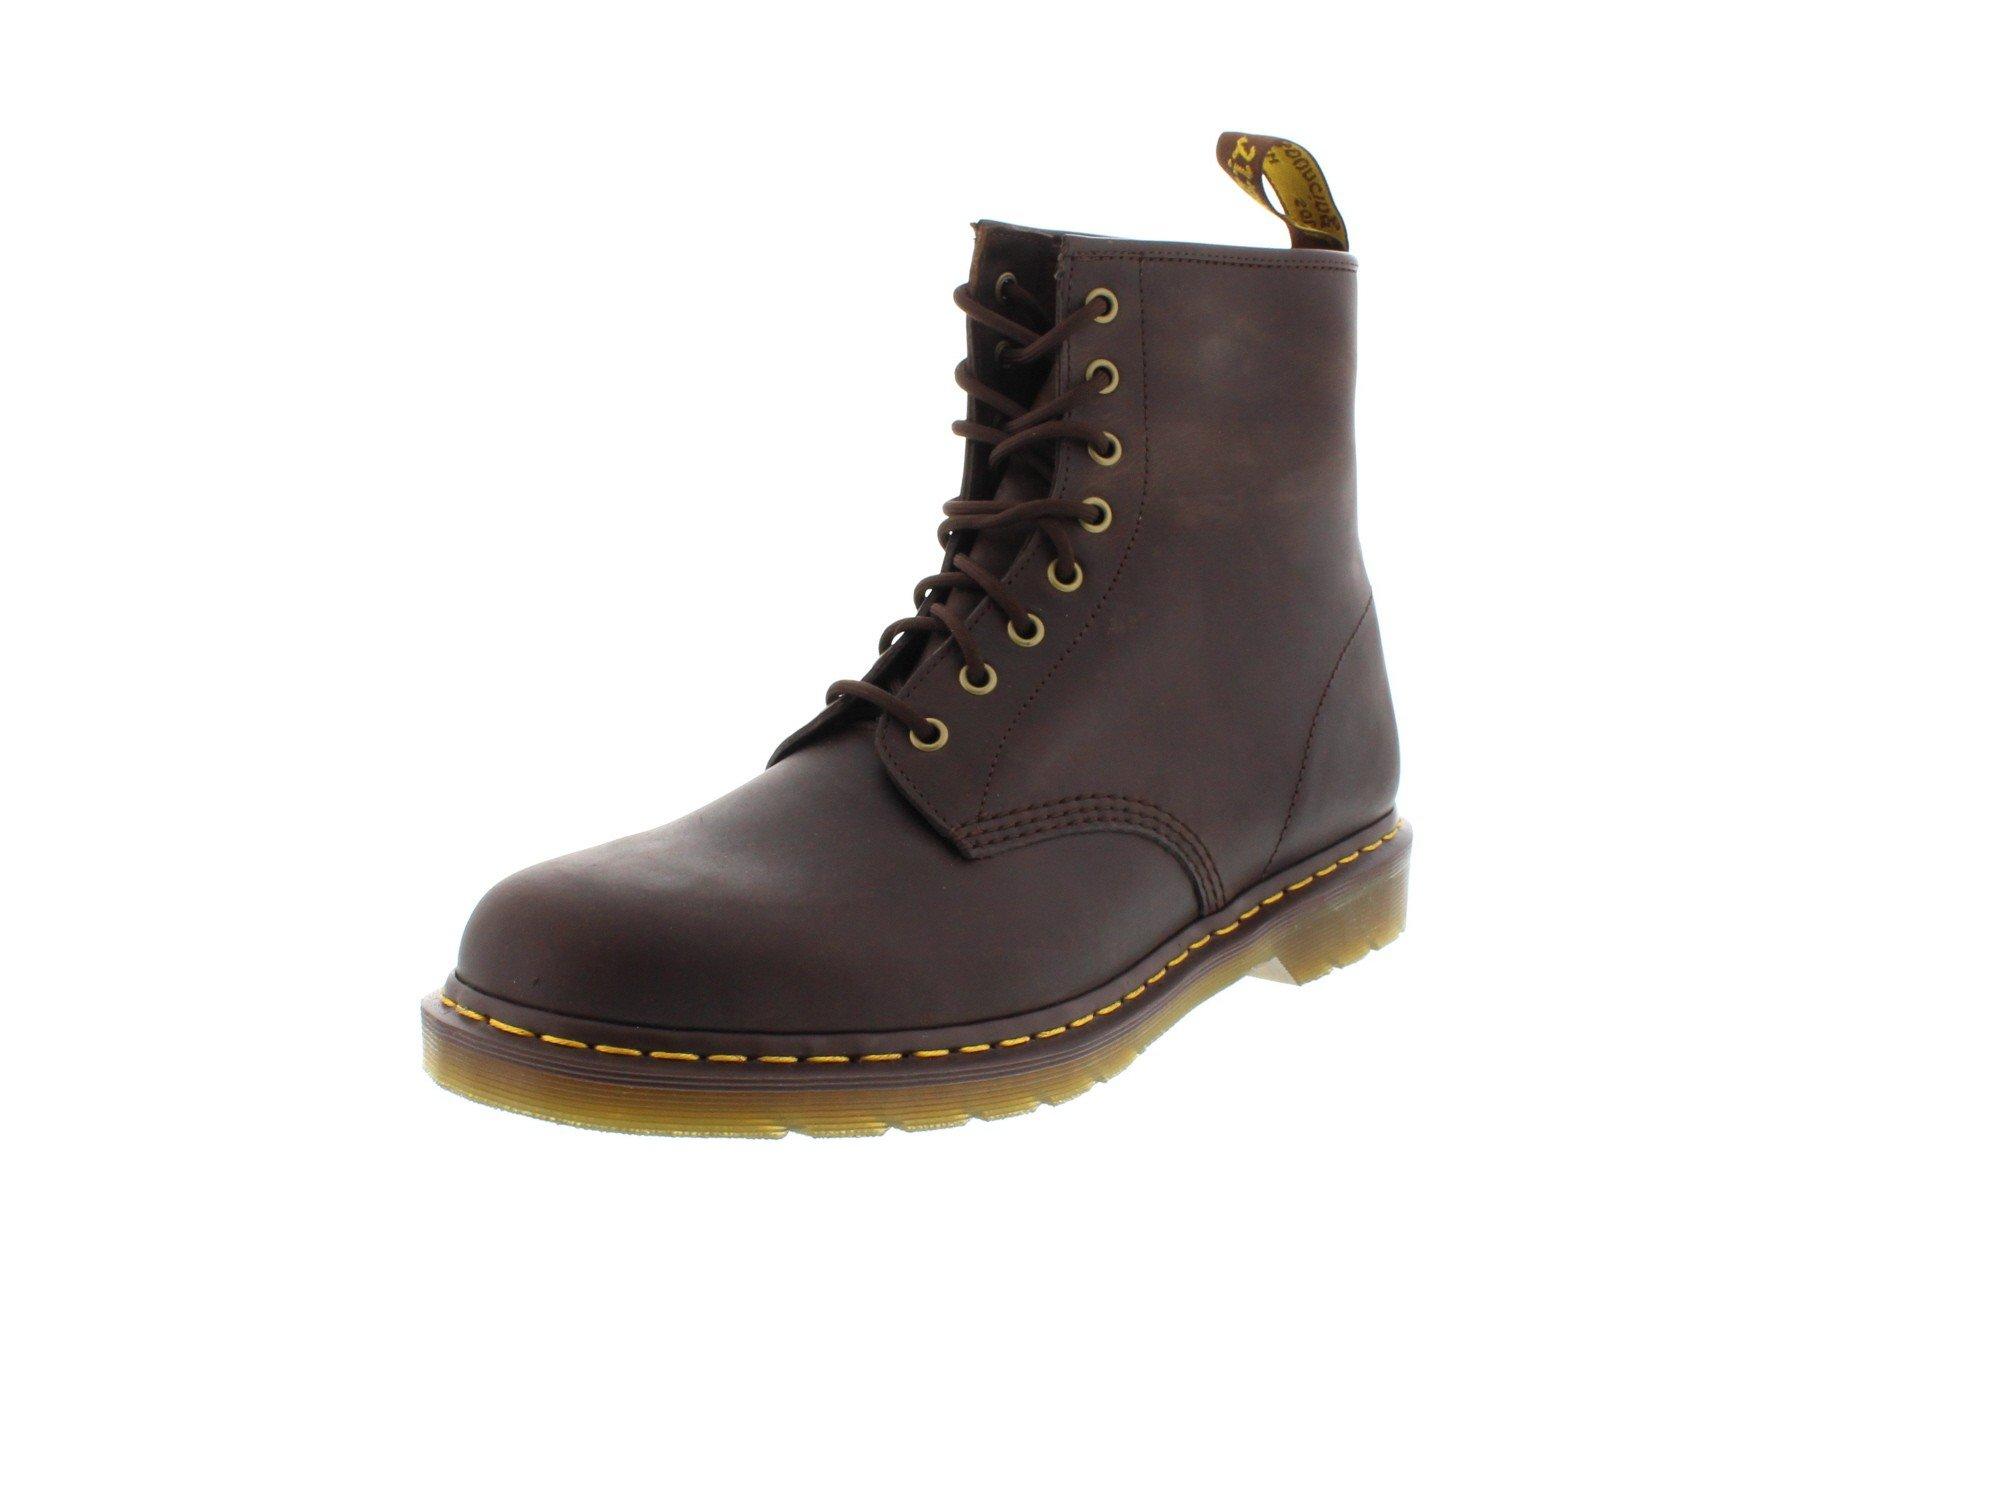 Dr. Martens Leather 1460 Crazy Horse Boots in Cocoa (Brown) for Men - Save  61% - Lyst